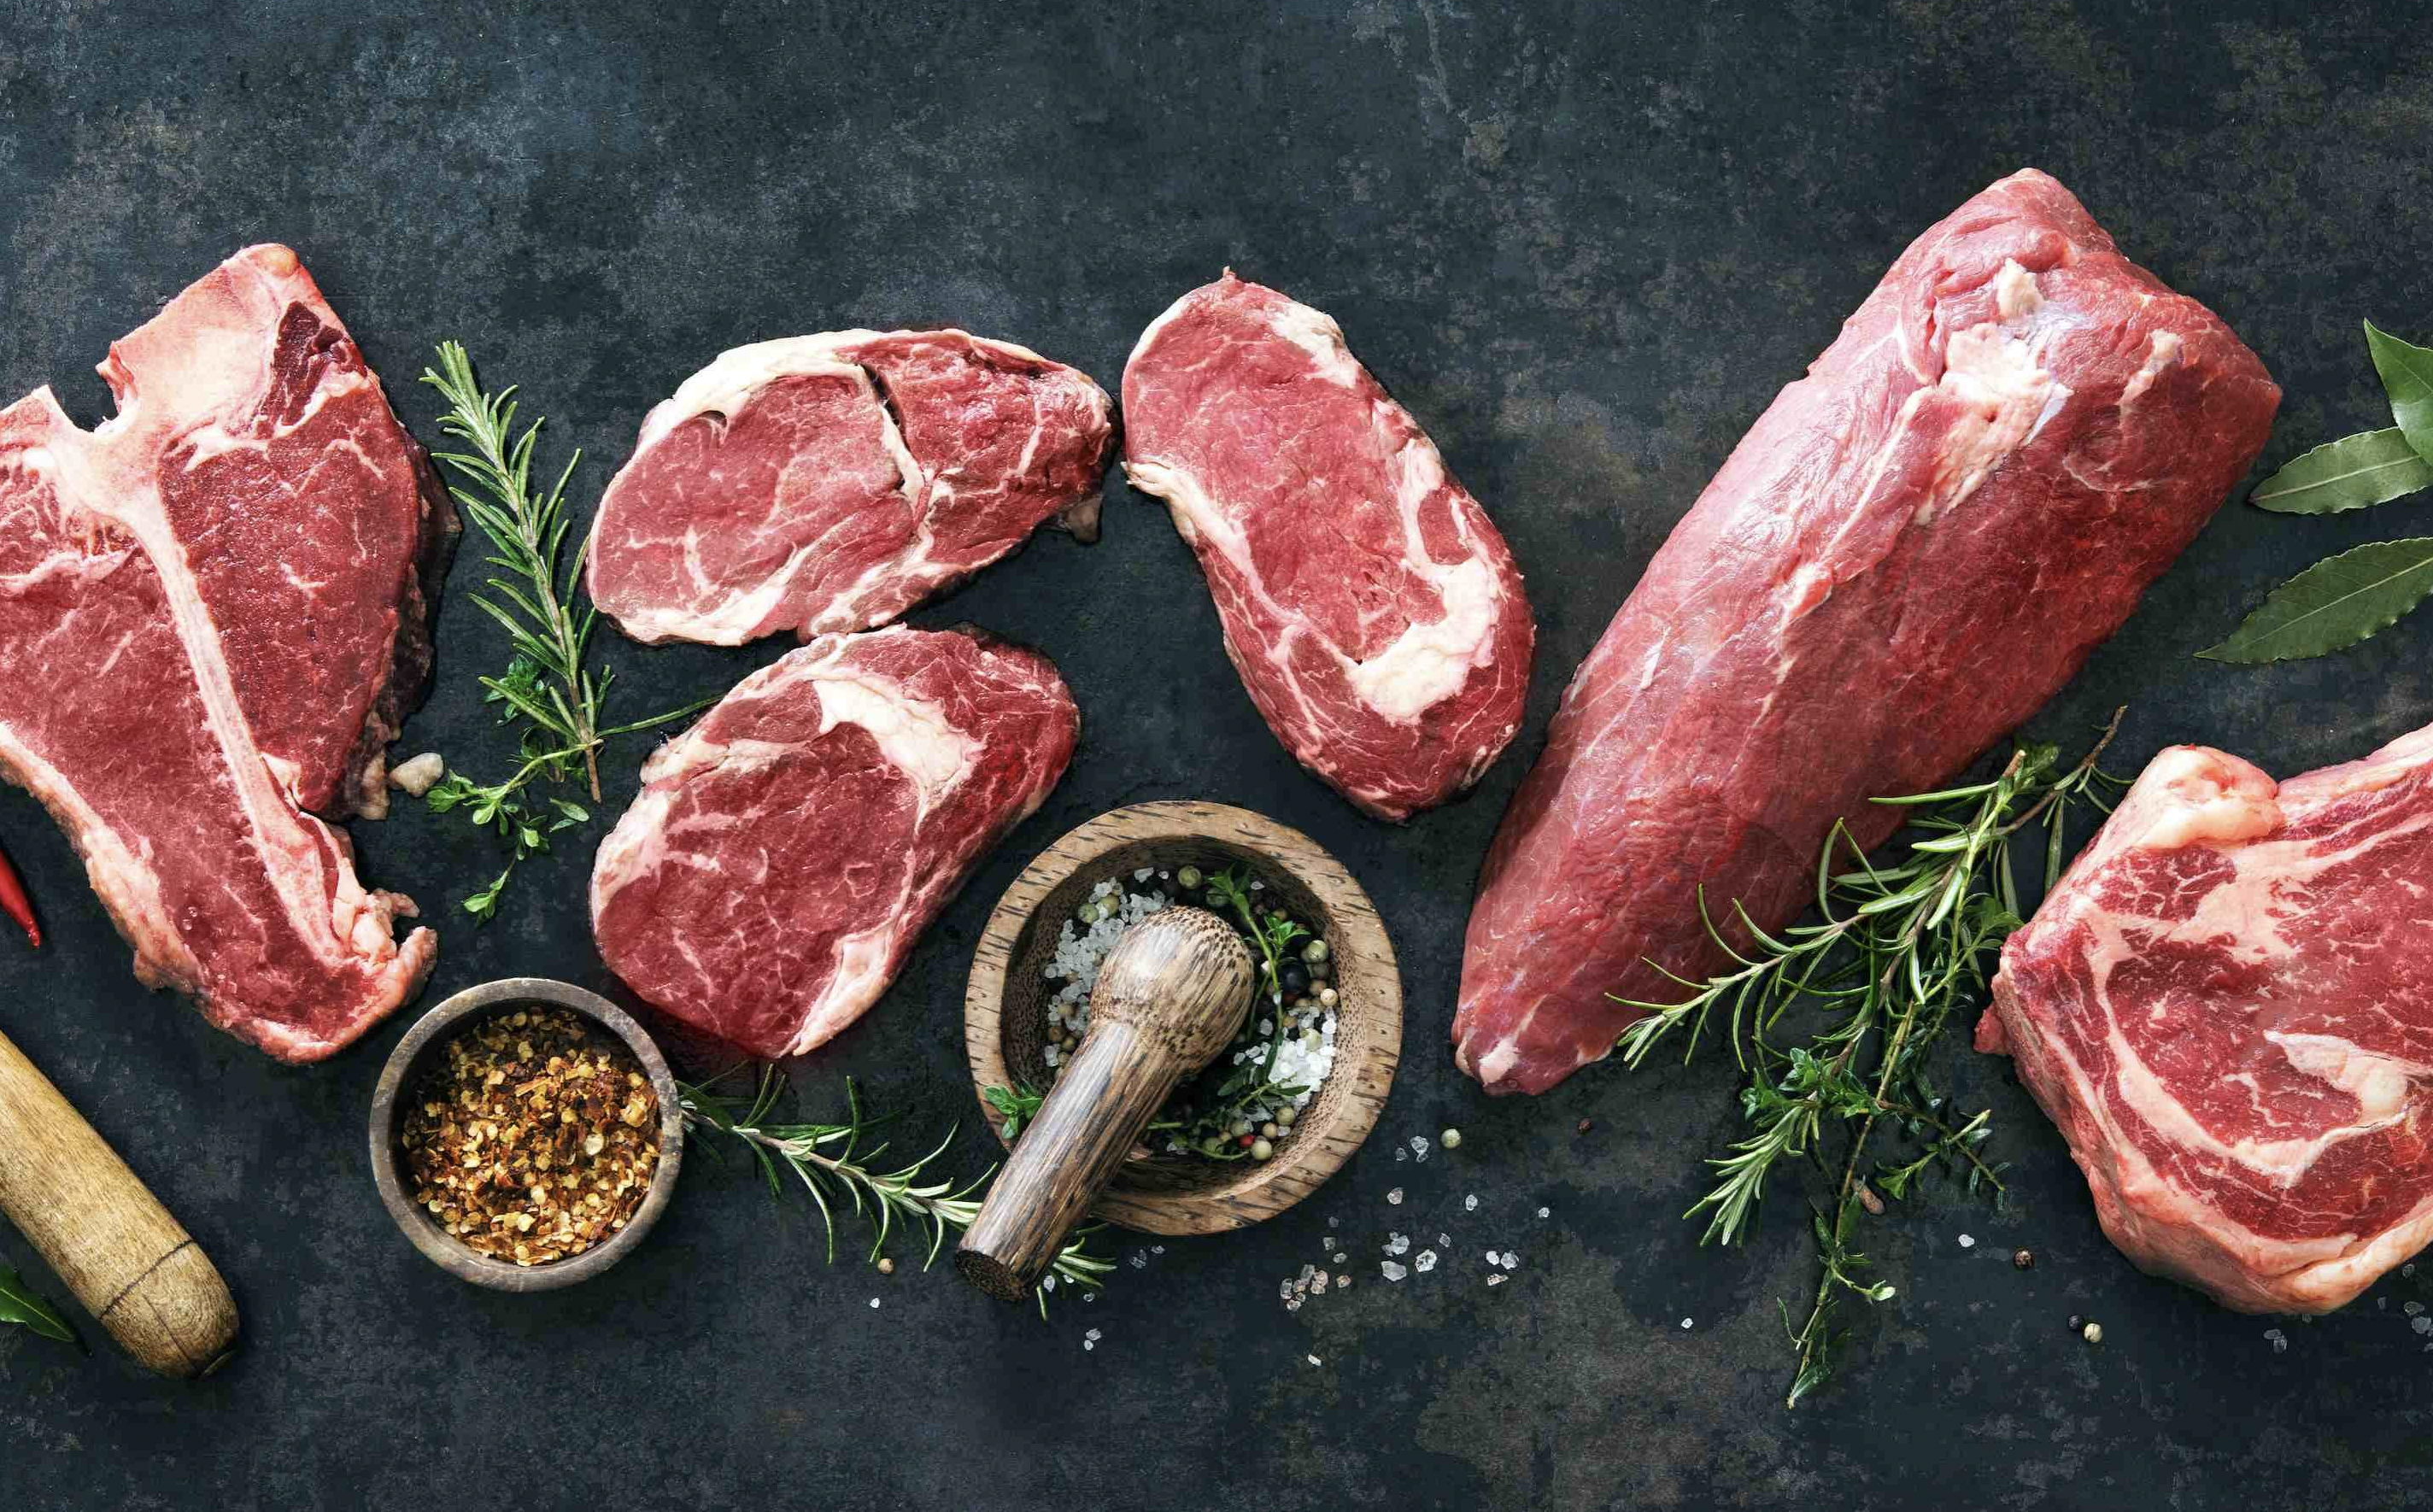 Buy Meat Online in Canada - Direct to Consumer Meat Products